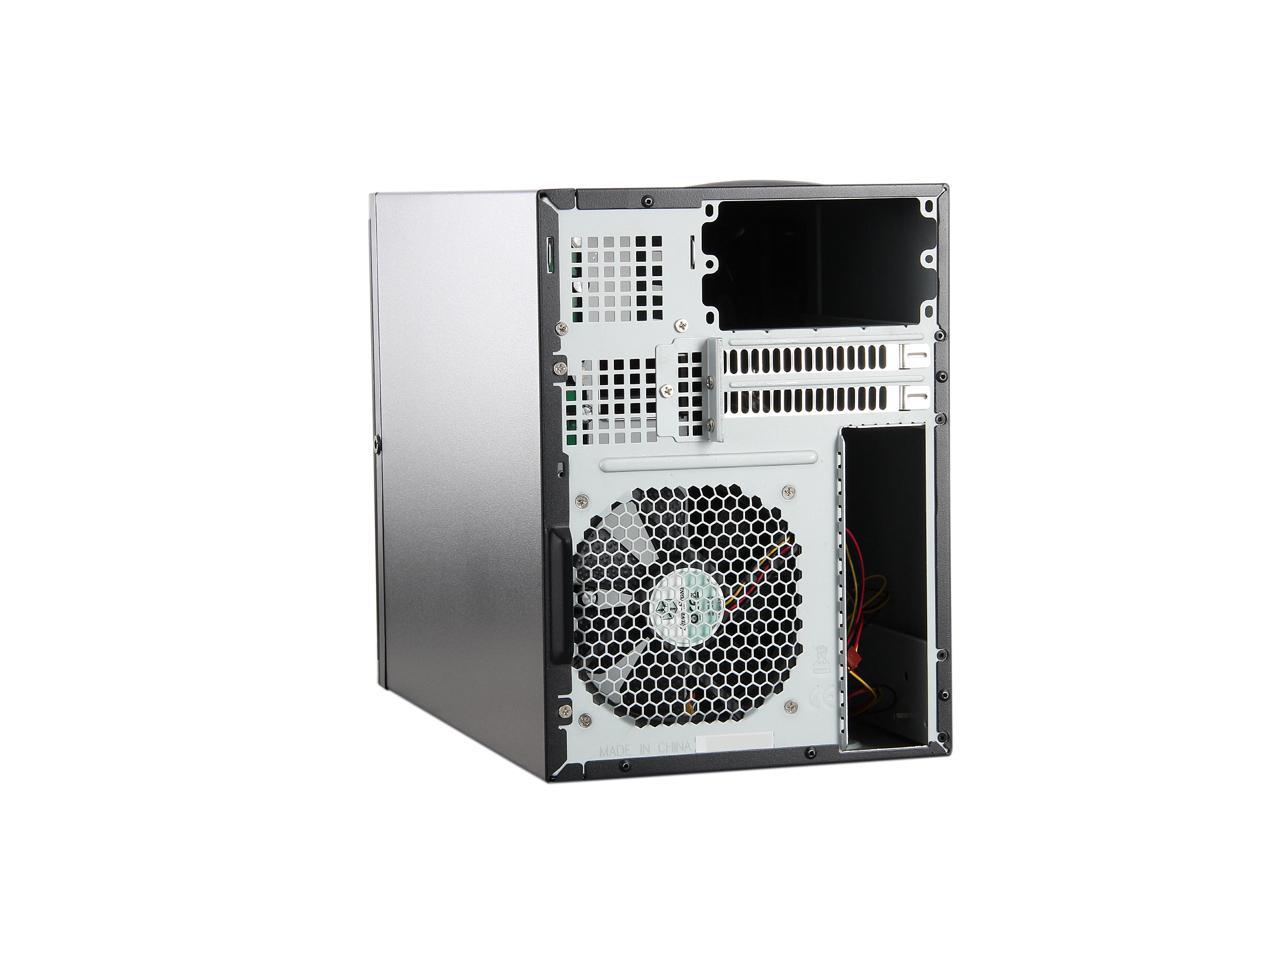 SilverStone DS380B Black Premium 8-bay Small Form Factor NAS Chassis